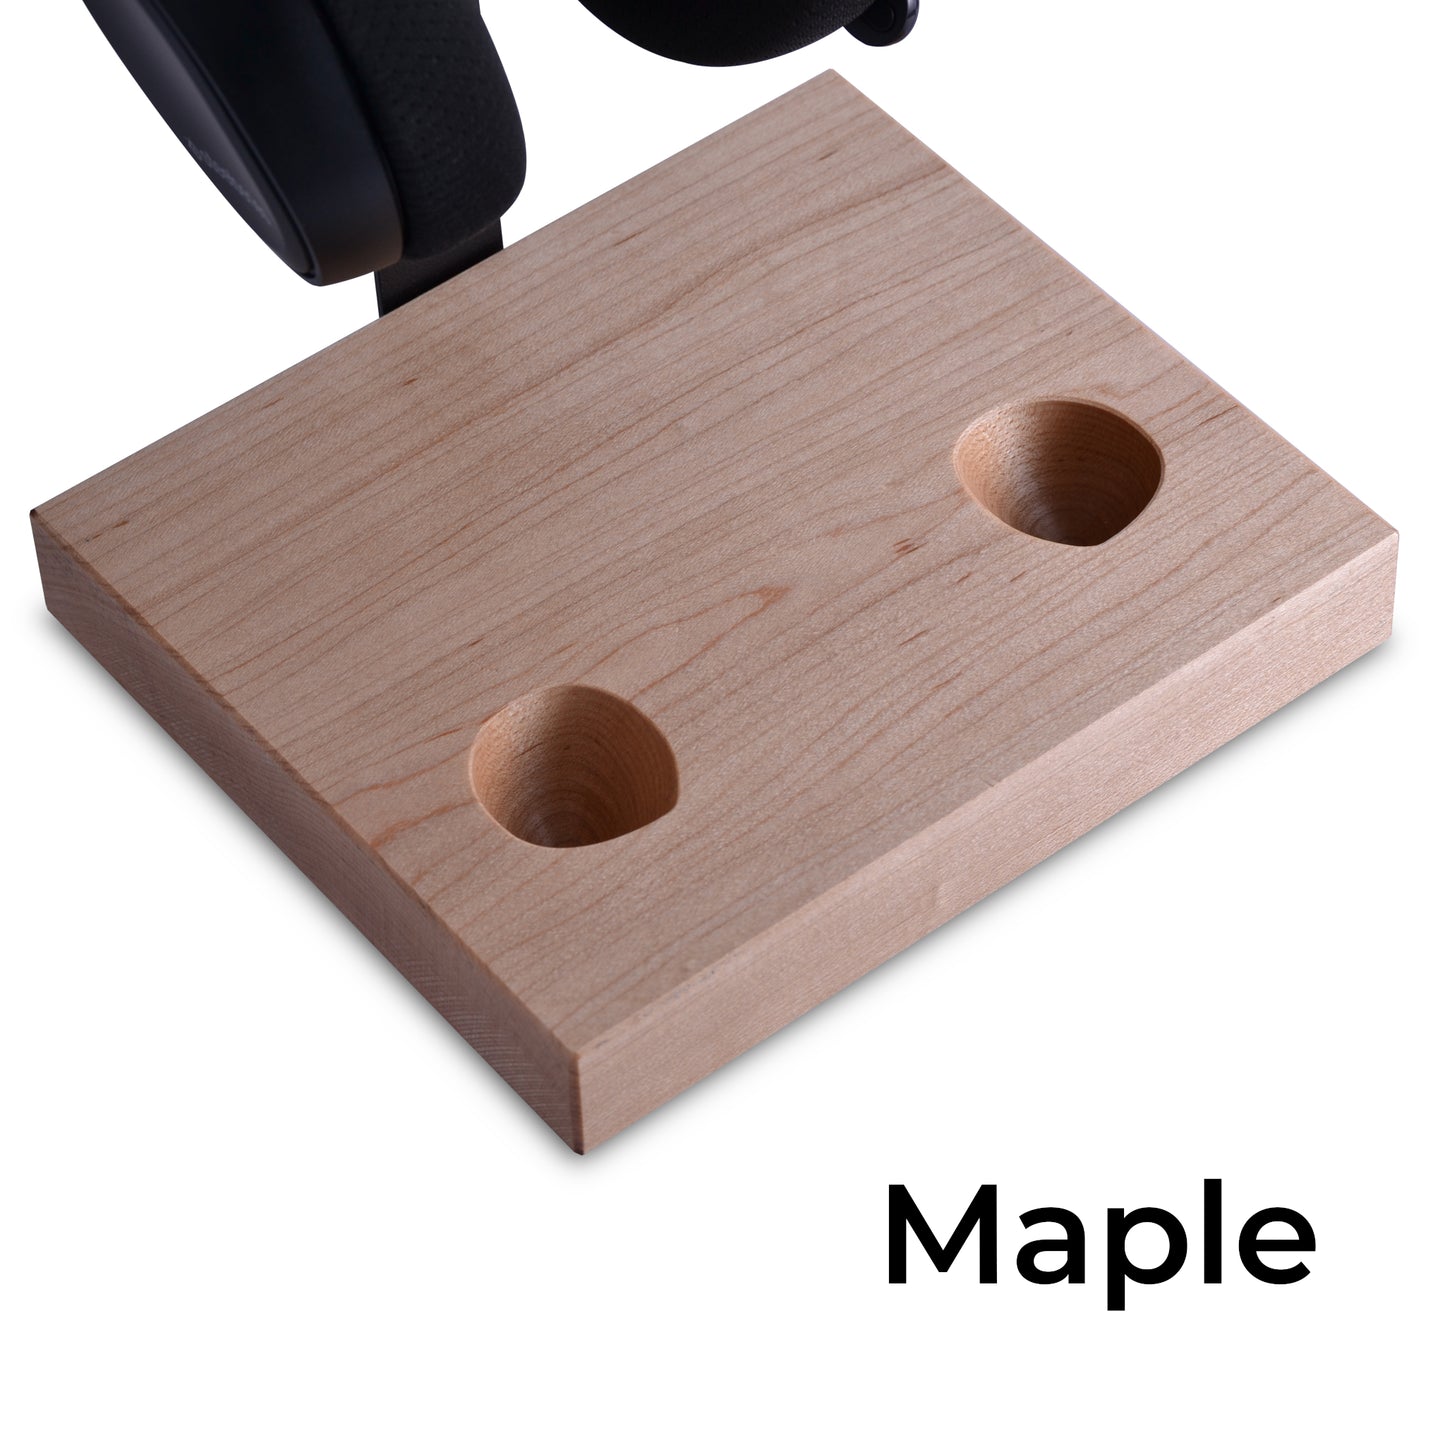 Maple version of headset and controller stand for Playstation 5 dualsense controller